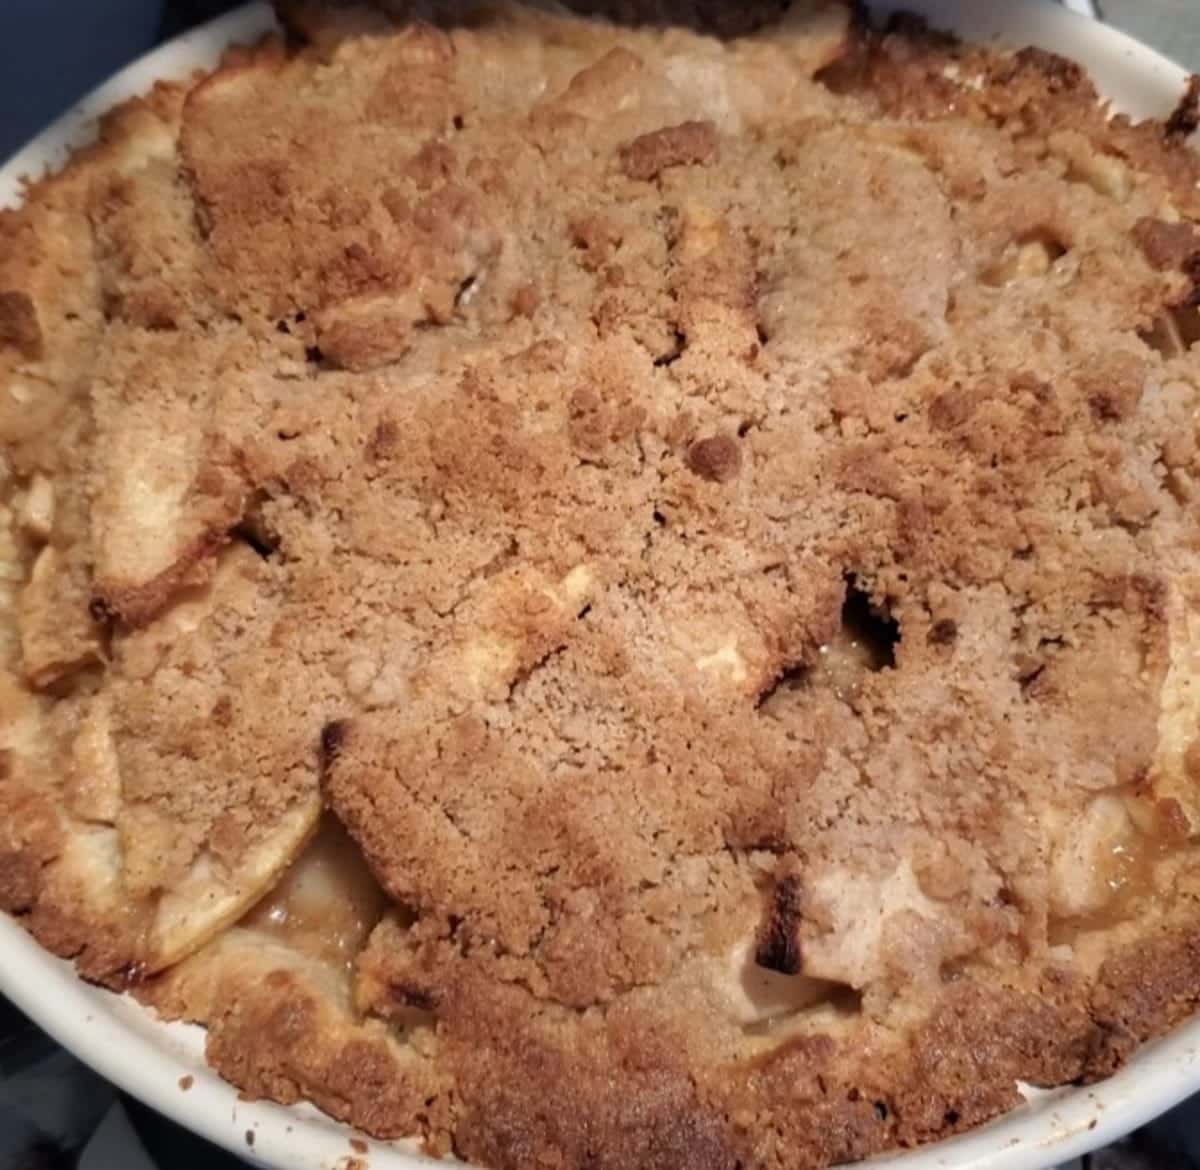 apple pear crumble pie from the oven from cleveland cooking. Apple and pear with a brown sugar and flour topping